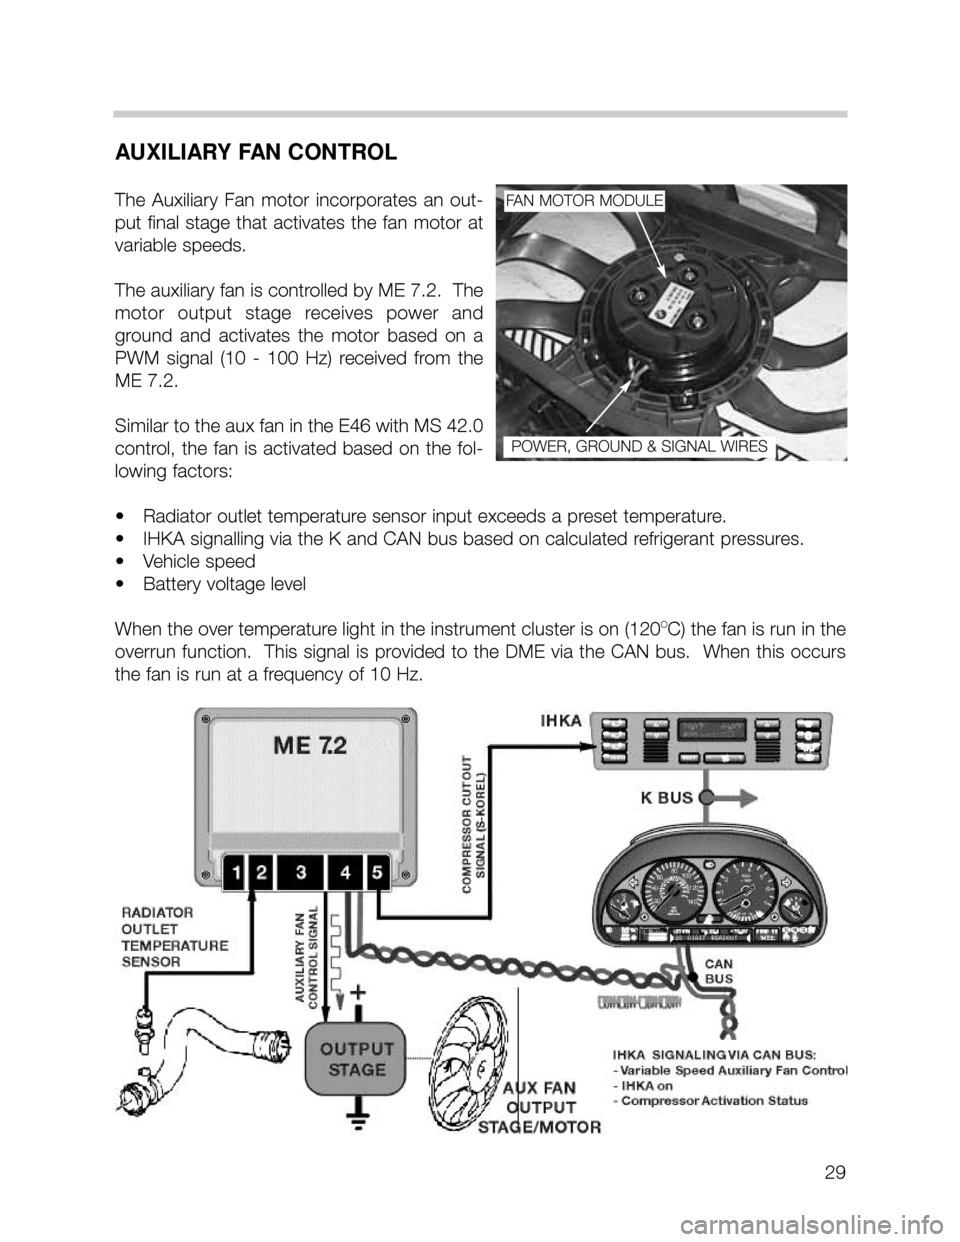 BMW 540i 2000 E39 M62TU Engine Owners Manual 29
AUXILIARY FAN CONTROL
The  Auxiliary  Fan  motor  incorporates  an  out-
put  final  stage  that  activates  the  fan  motor  at
variable speeds.  
The auxiliary fan is controlled by ME 7.2.  The
m